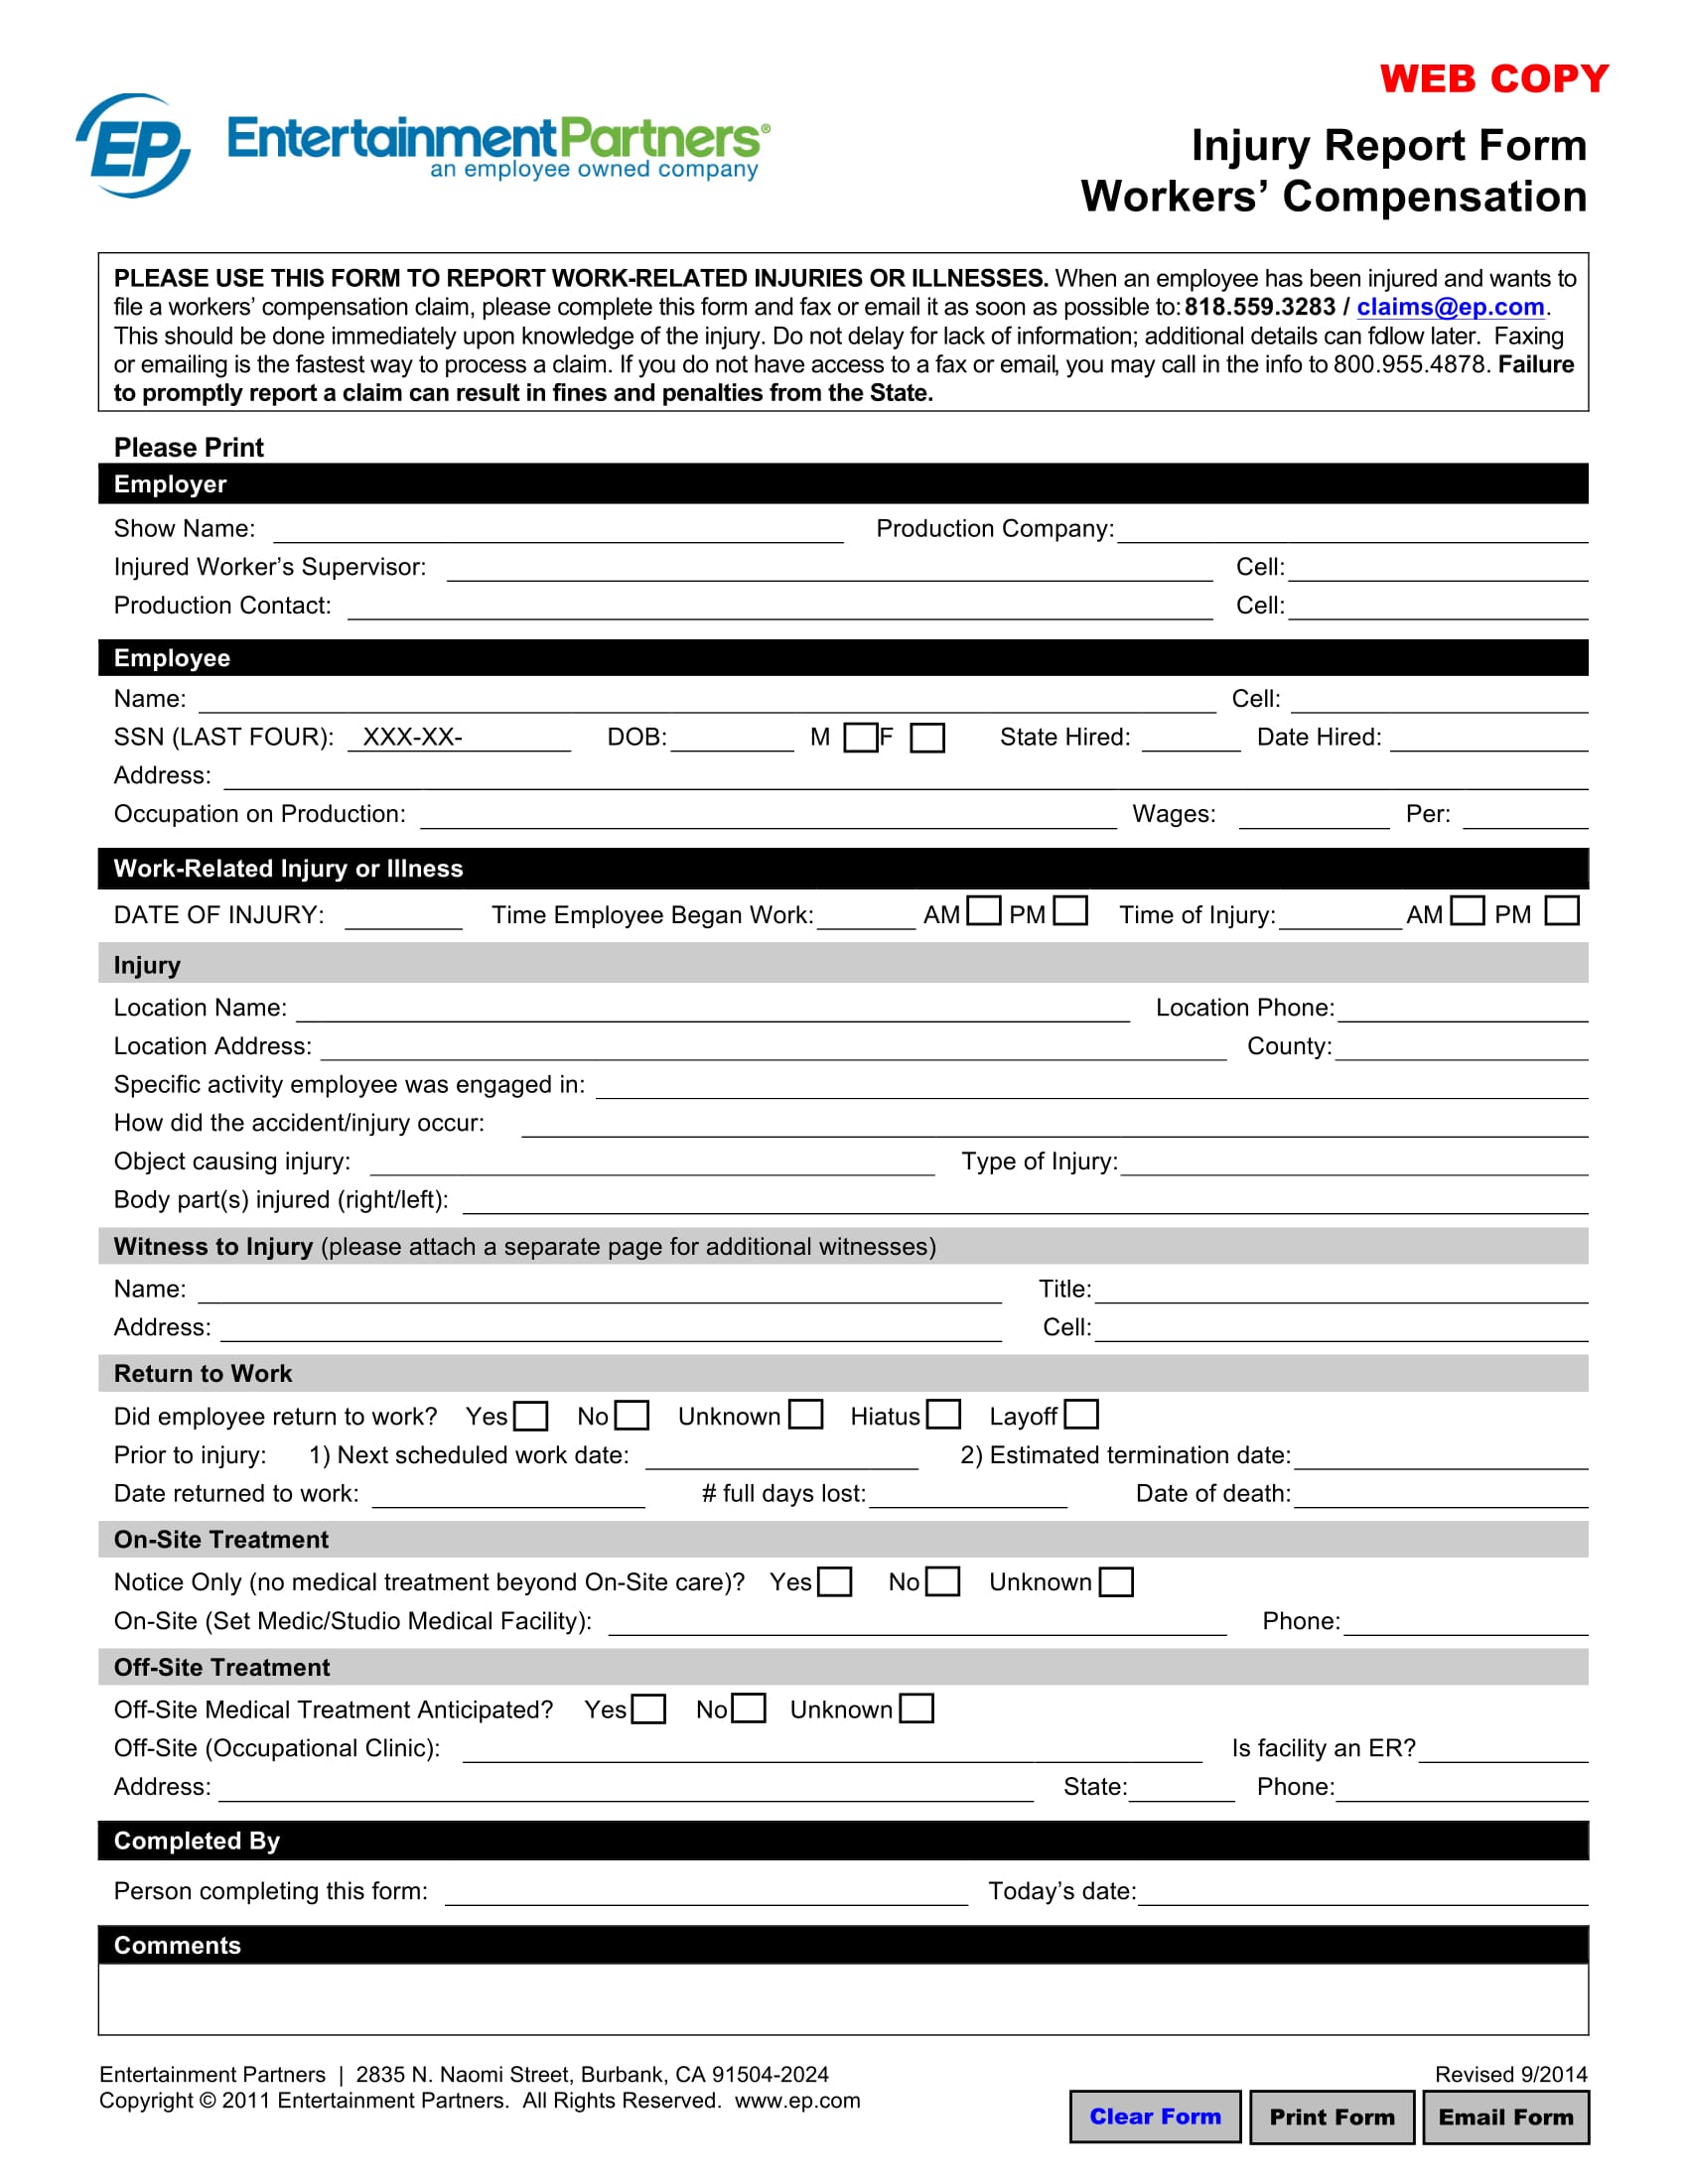 injury report form – worker’s compensation 1